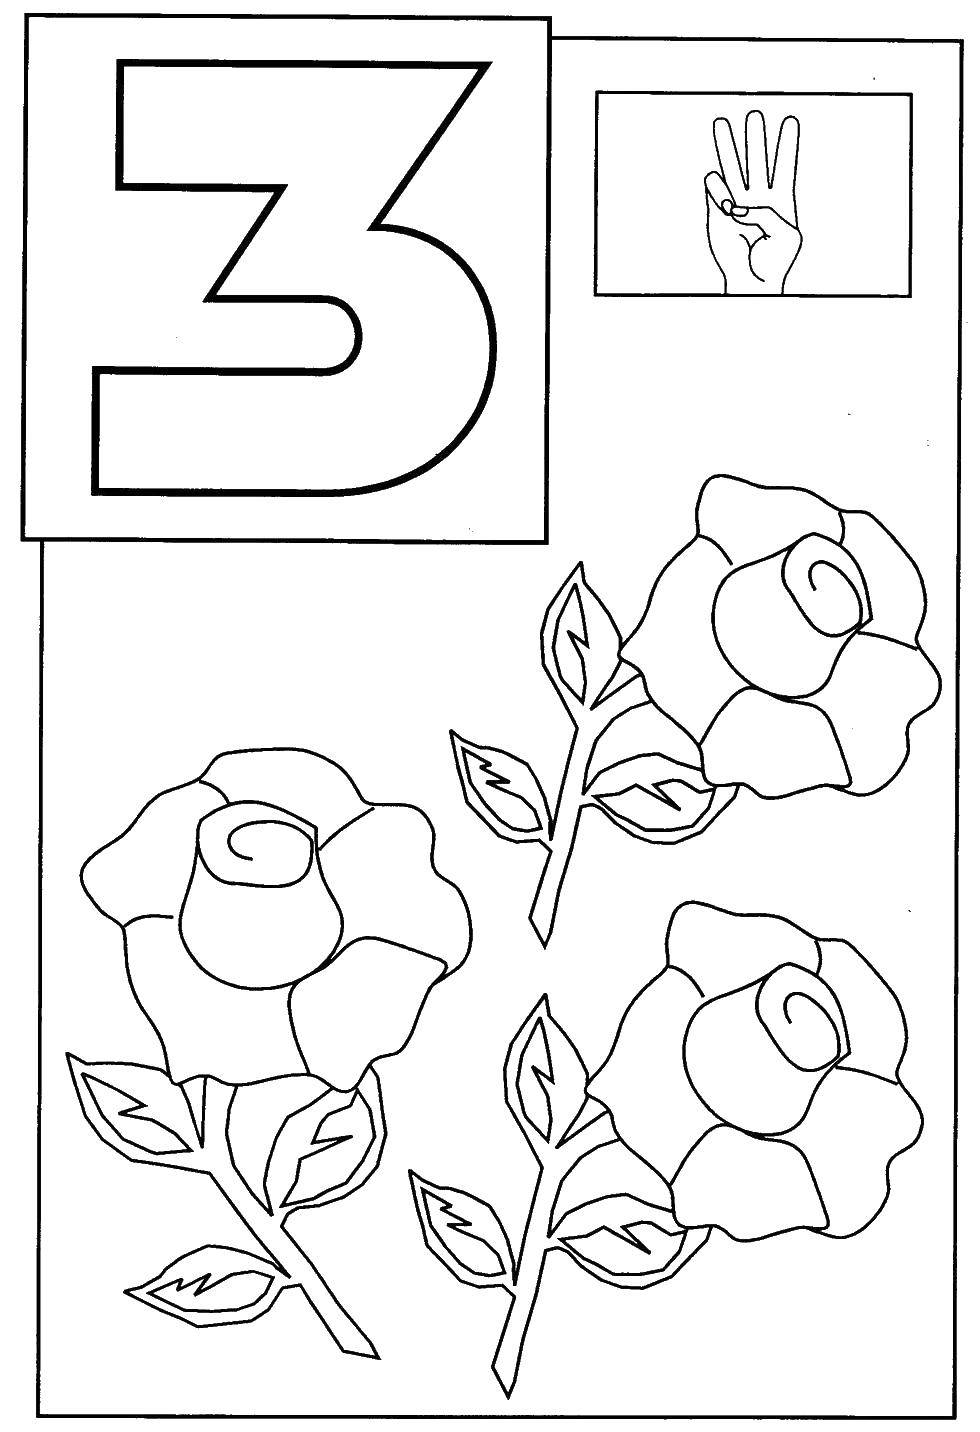 Coloring Three roses. Category Learn to count. Tags:  counting, numbers, three.